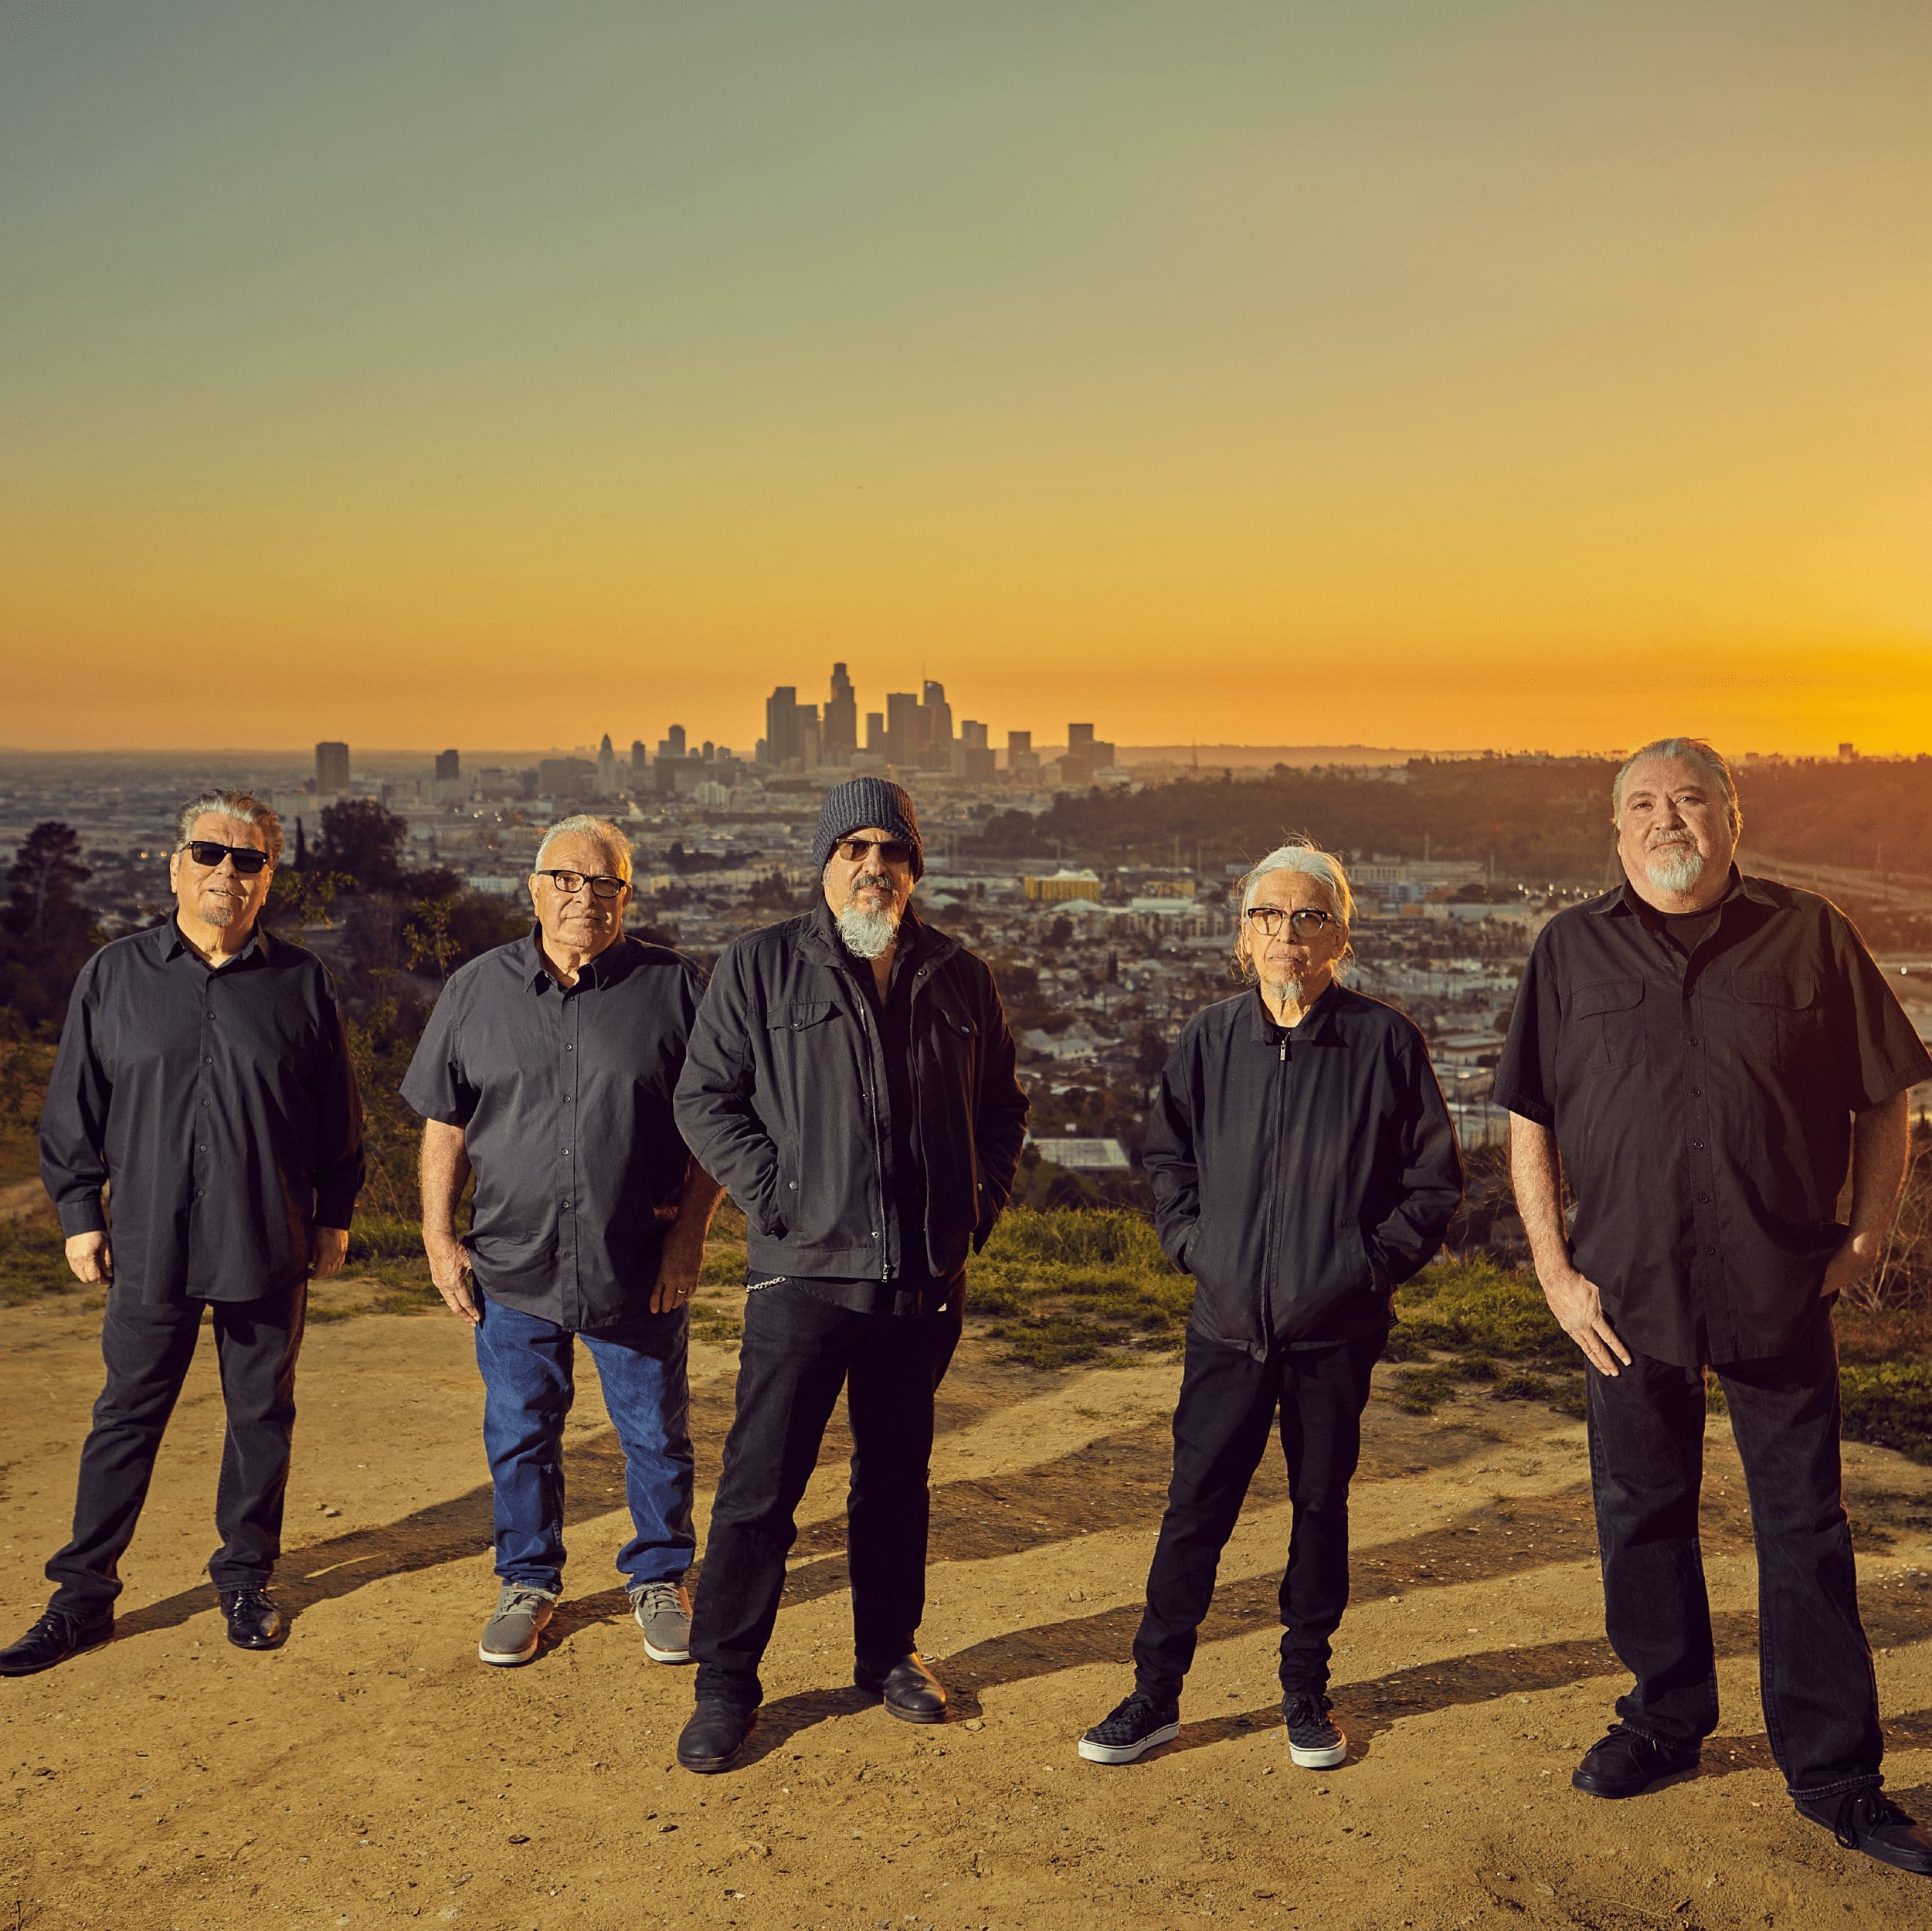 Image of Los Lobos standing on a hill at sunset with city skyline behind